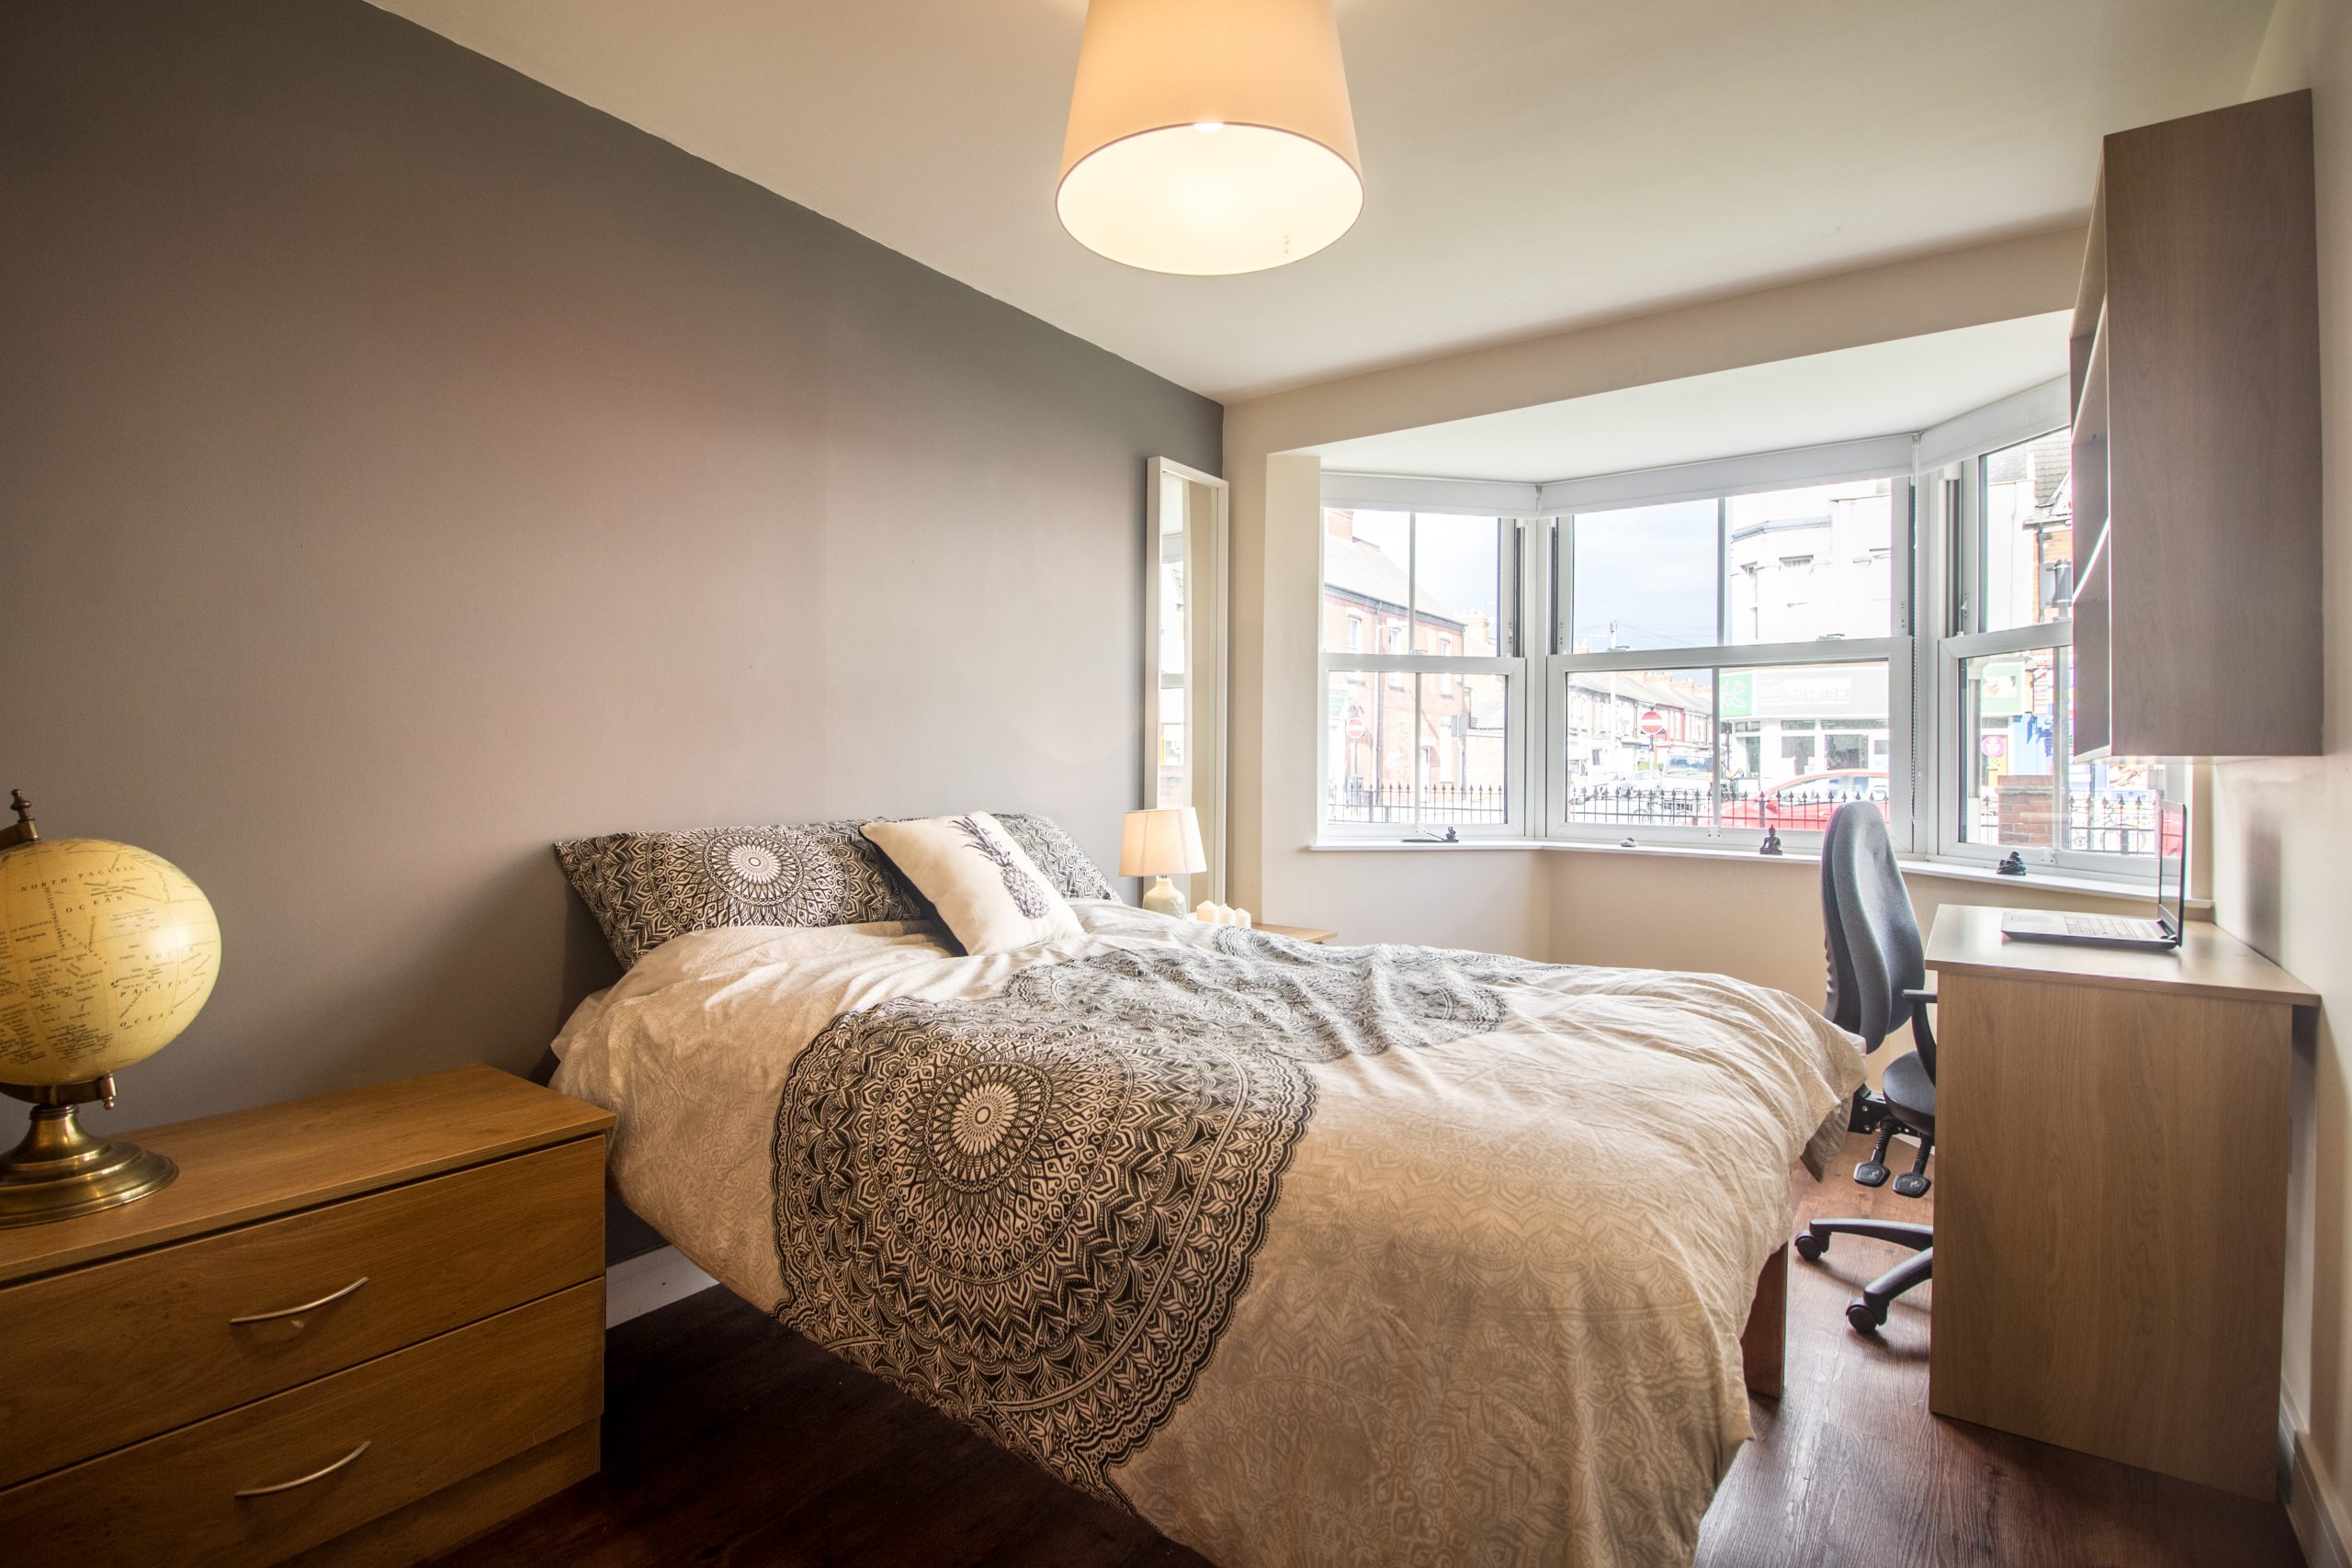 student lets hull, student houses hull, en suite student accommodation hull